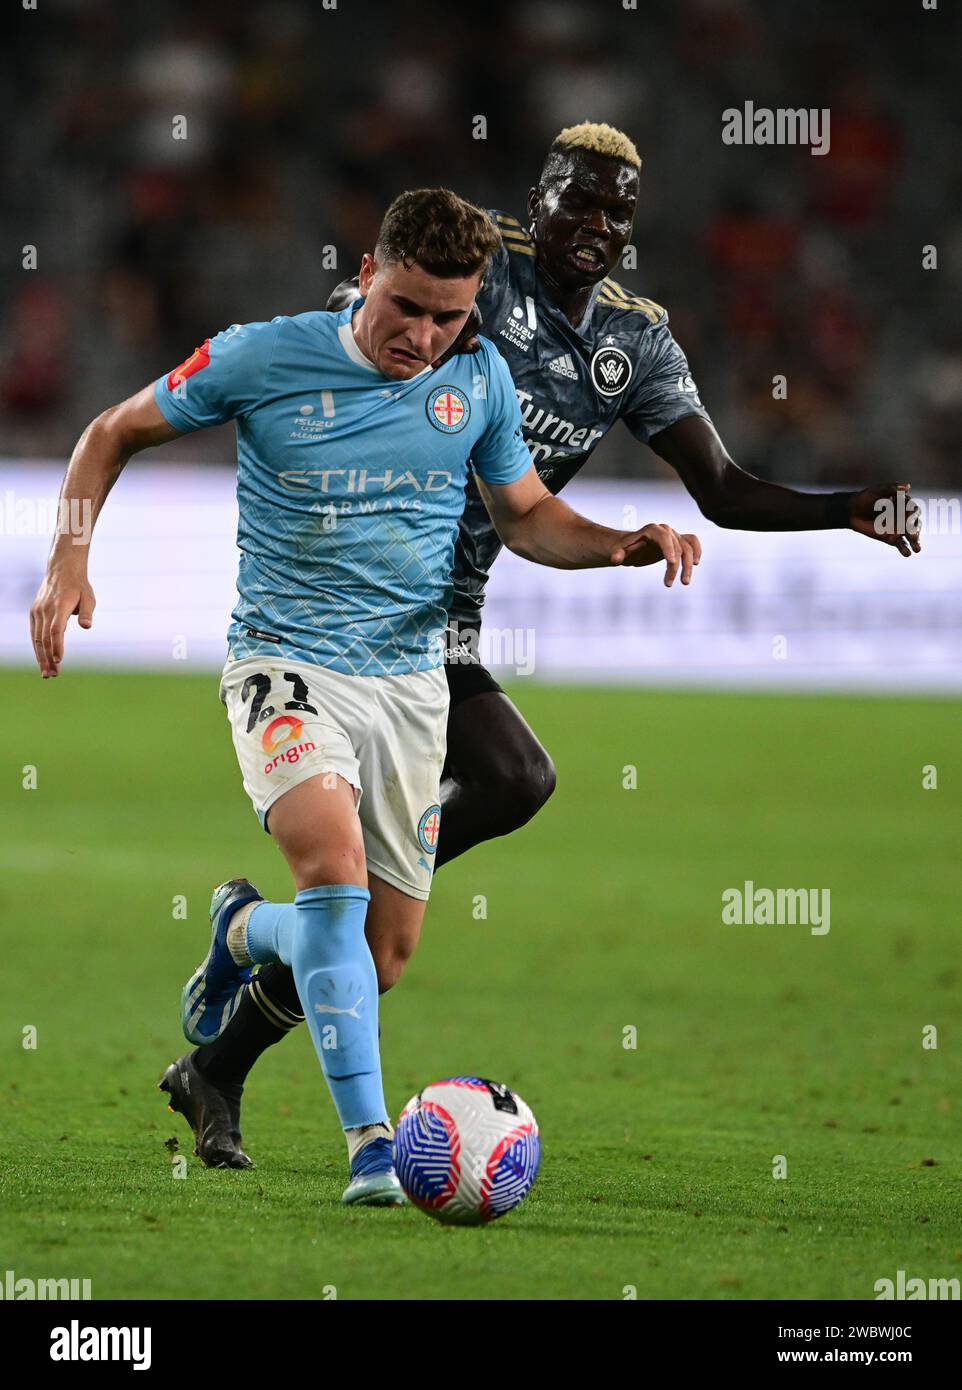 Parramatta, Australia. 12th Jan, 2024. Alessandro Lopane (L) of the Melbourne City FC and Valentino Kuach Yuel (R) of the Western Sydney Wanderers FC seen in action during the A-League Men's 2023/24 season Unite Round match between Melbourne City FC and Western Sydney Wanderers FC at CommBank Stadium. Final score; Western Sydney Wanderers 1:0 Melbourne City FC. (Photo by Luis Veniegra/SOPA Images/Sipa USA) Credit: Sipa USA/Alamy Live News Stock Photo